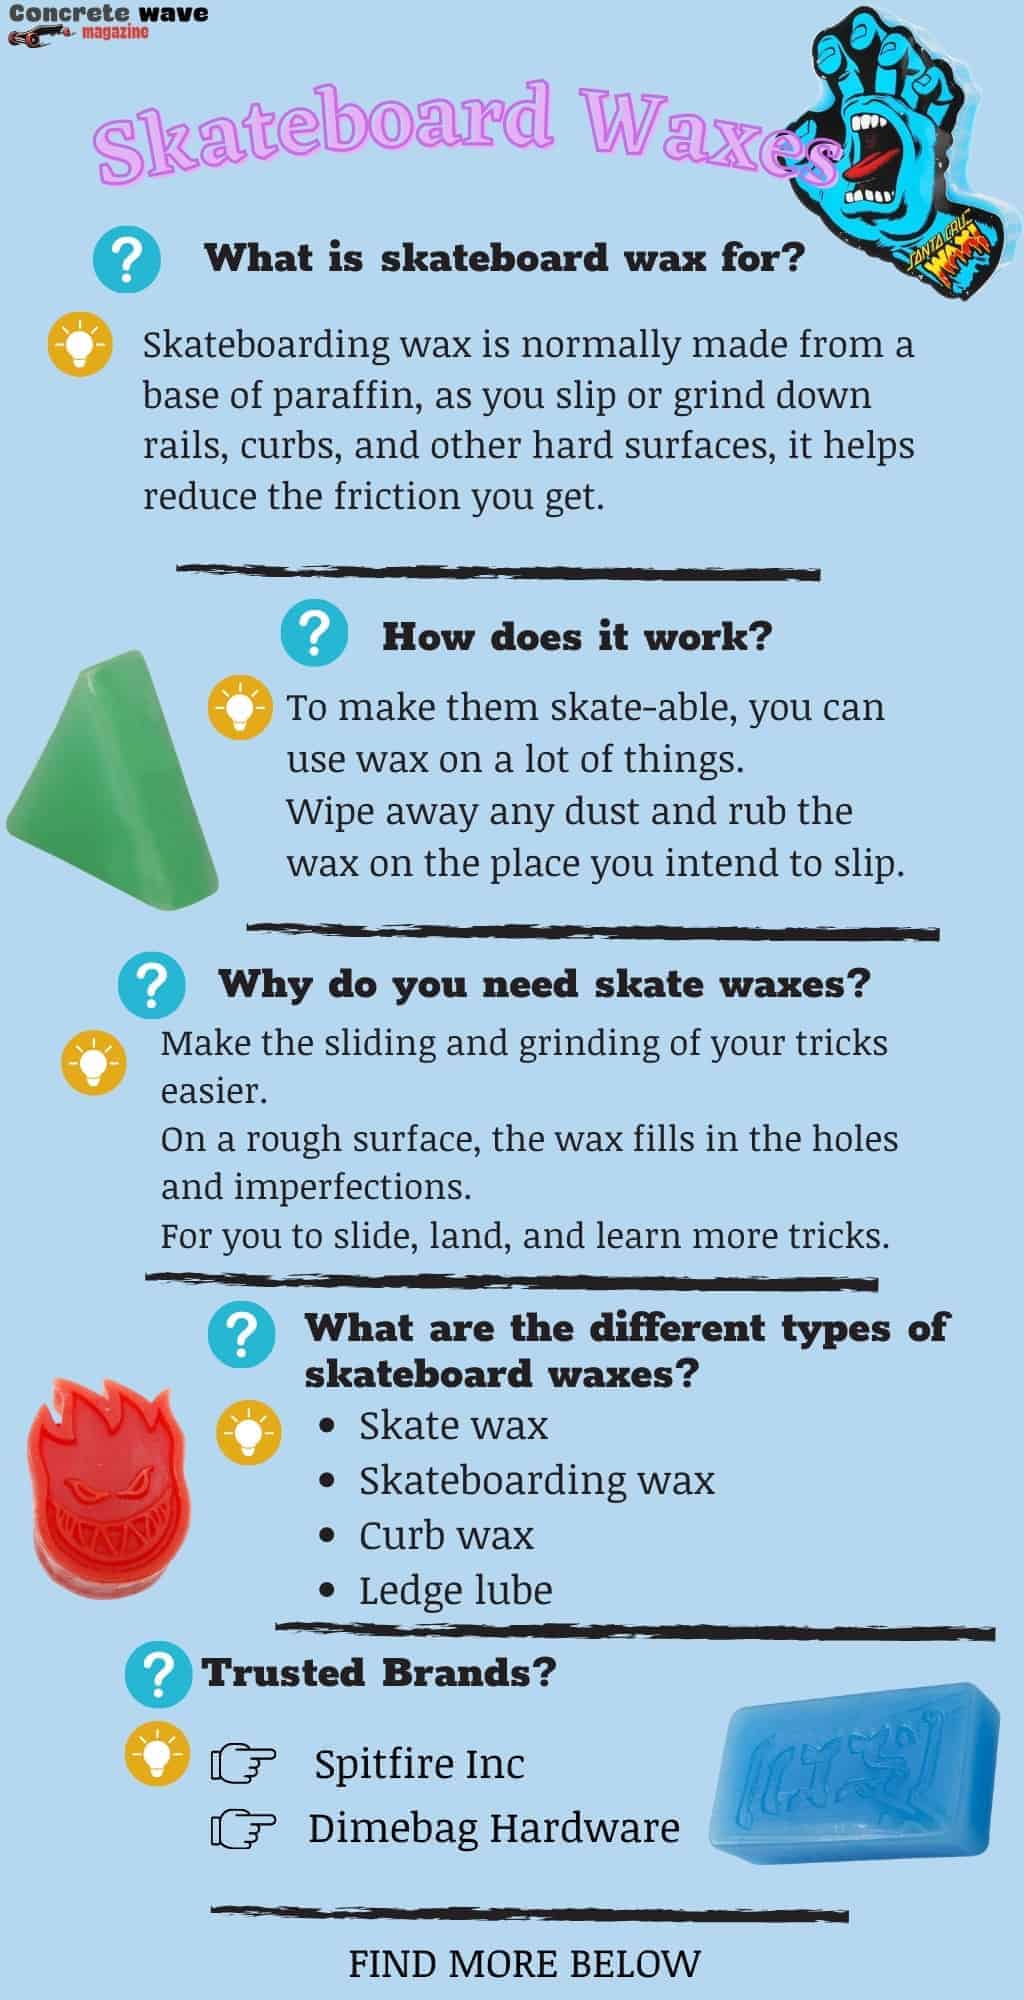 Best Skateboard Wax and How to Use it (skate wax recipe)